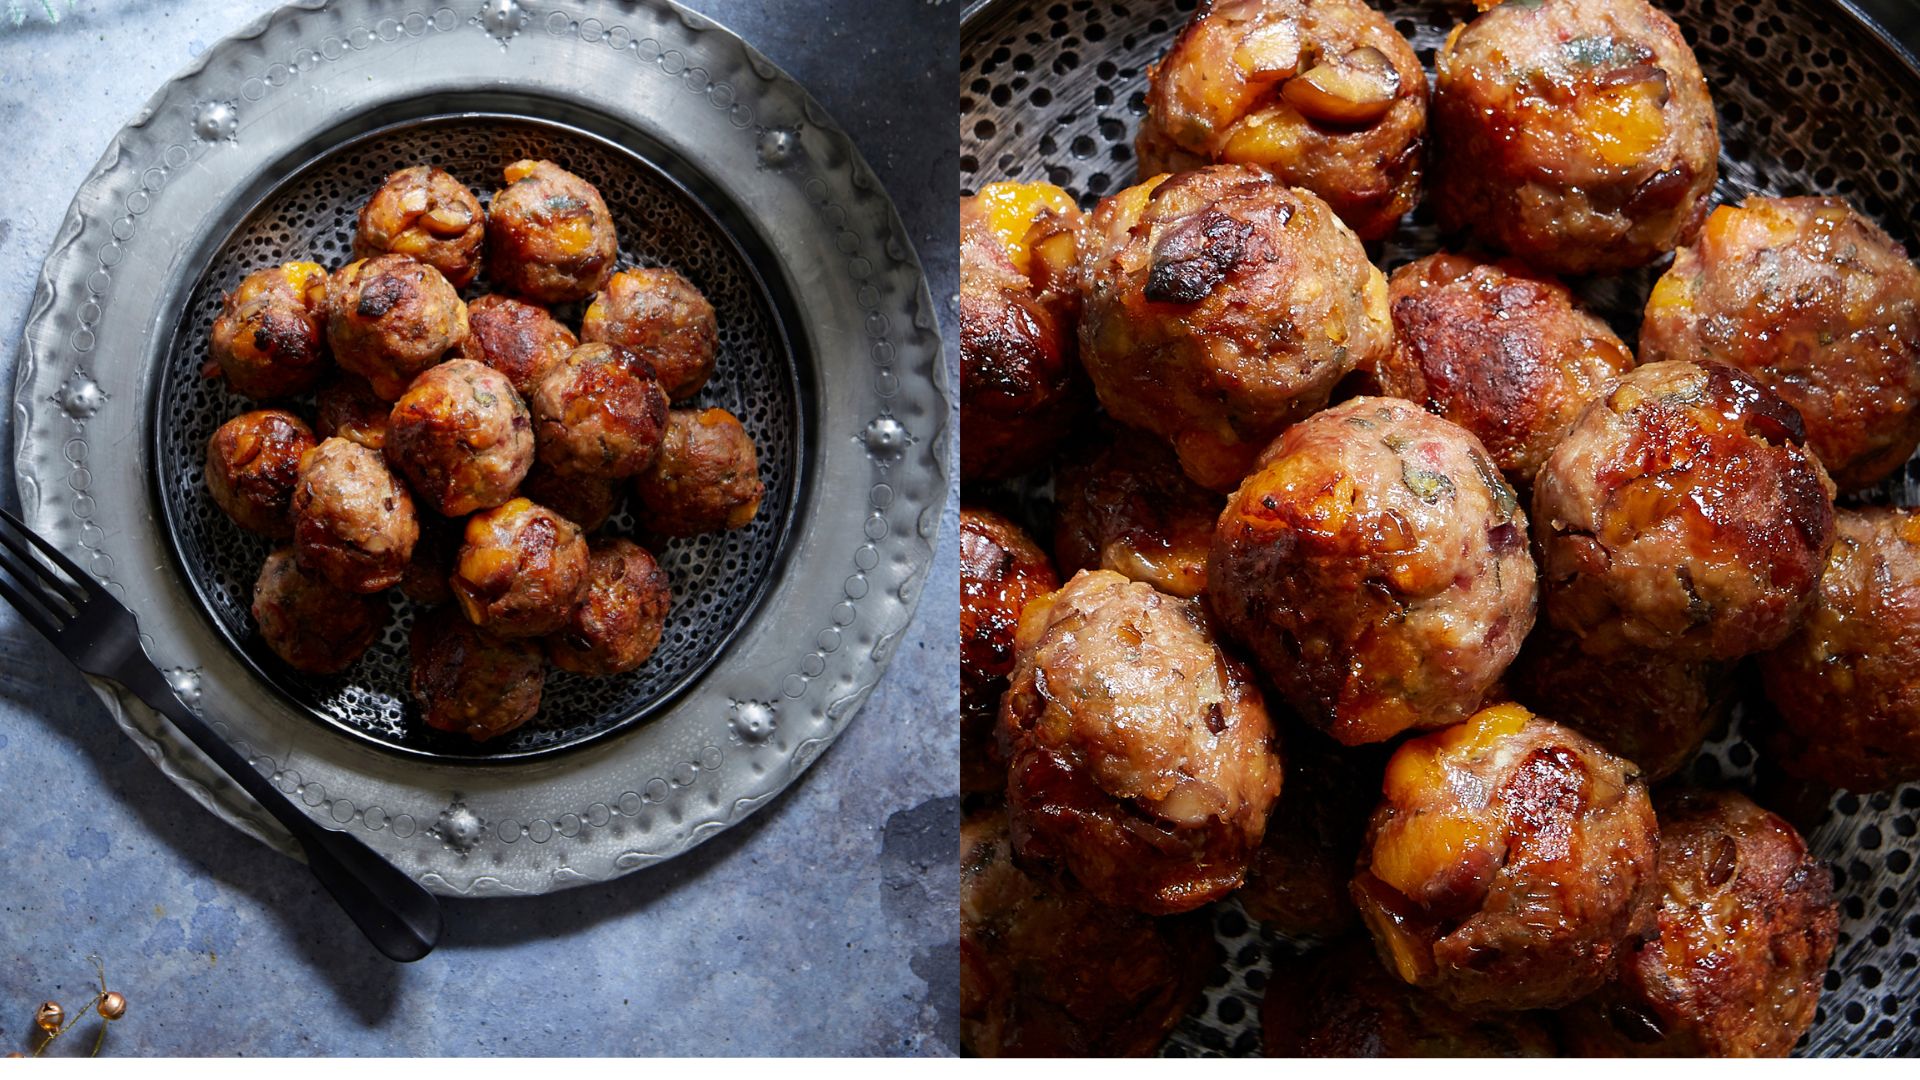 Stuffing balls - a sunday lunch side idea